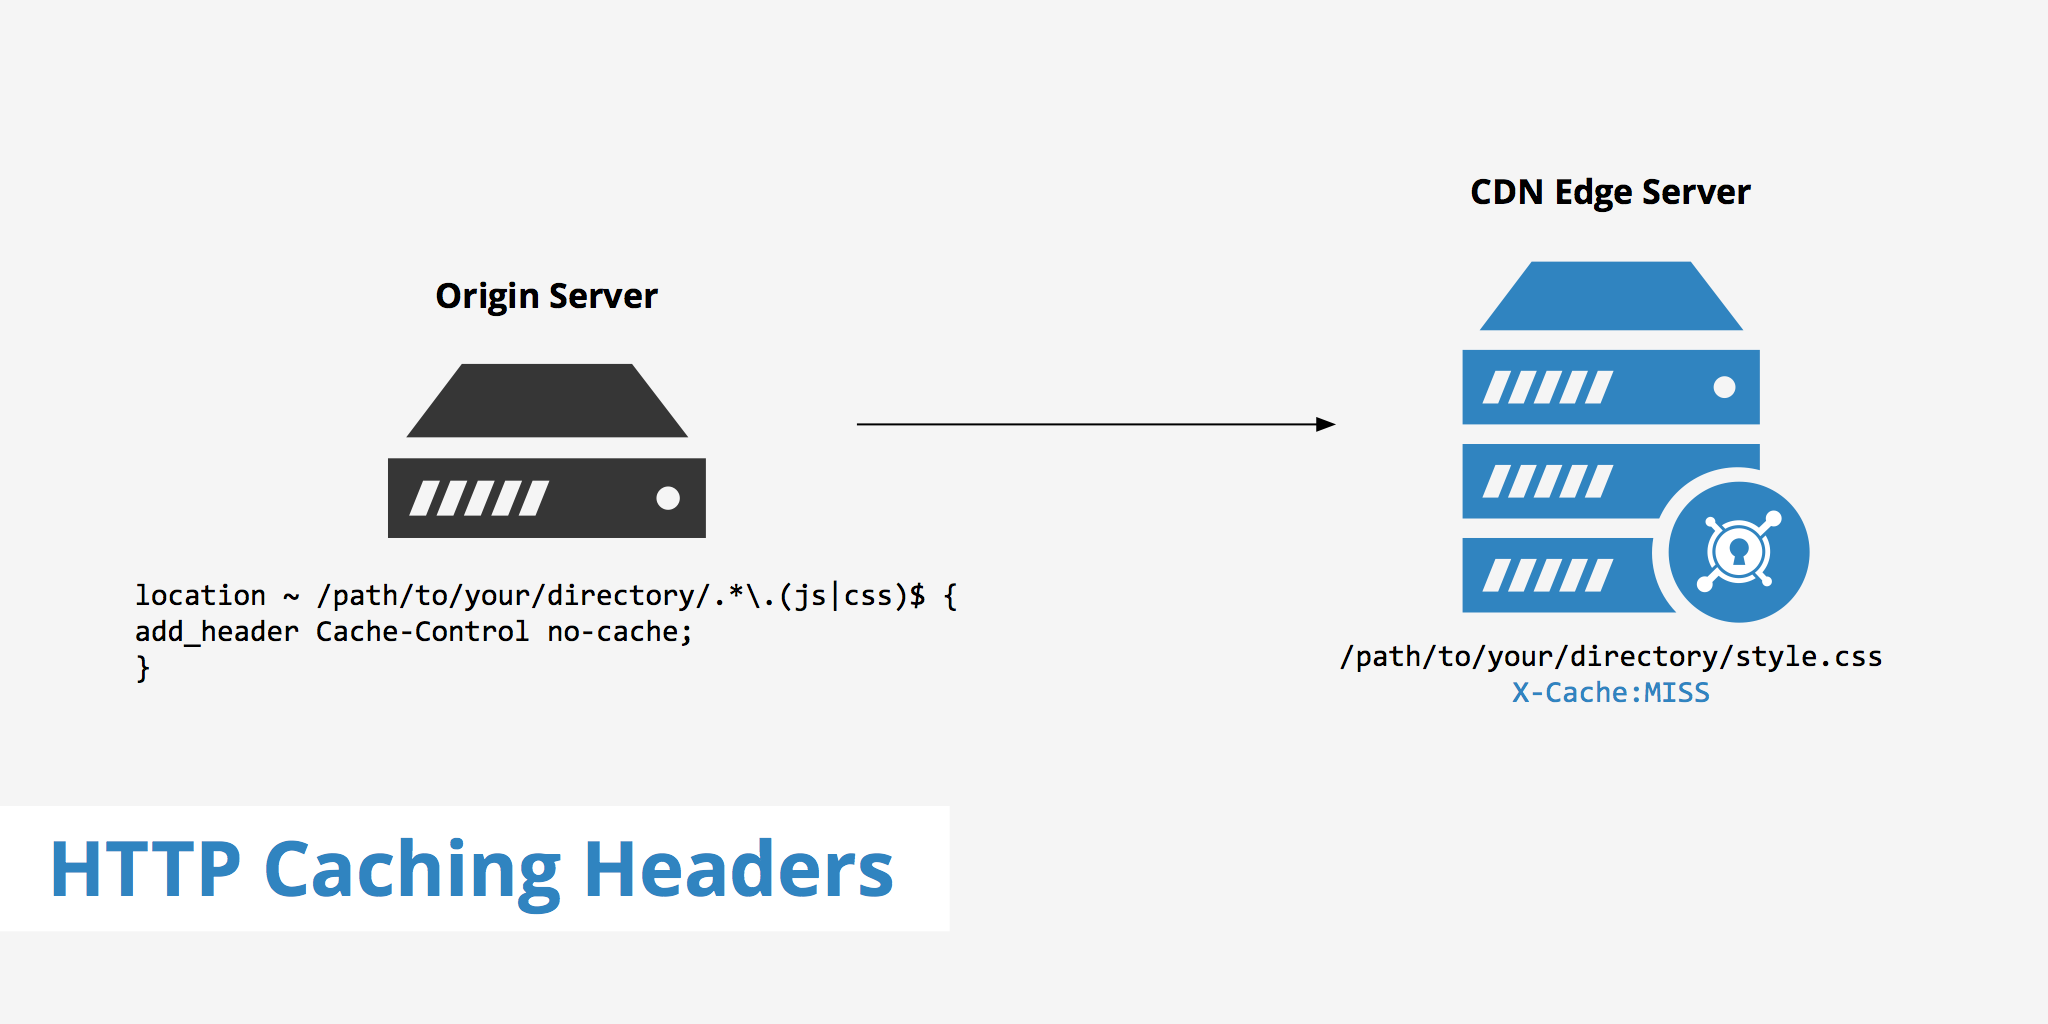 Using HTTP Caching Headers to Exclude Assets from a CDN